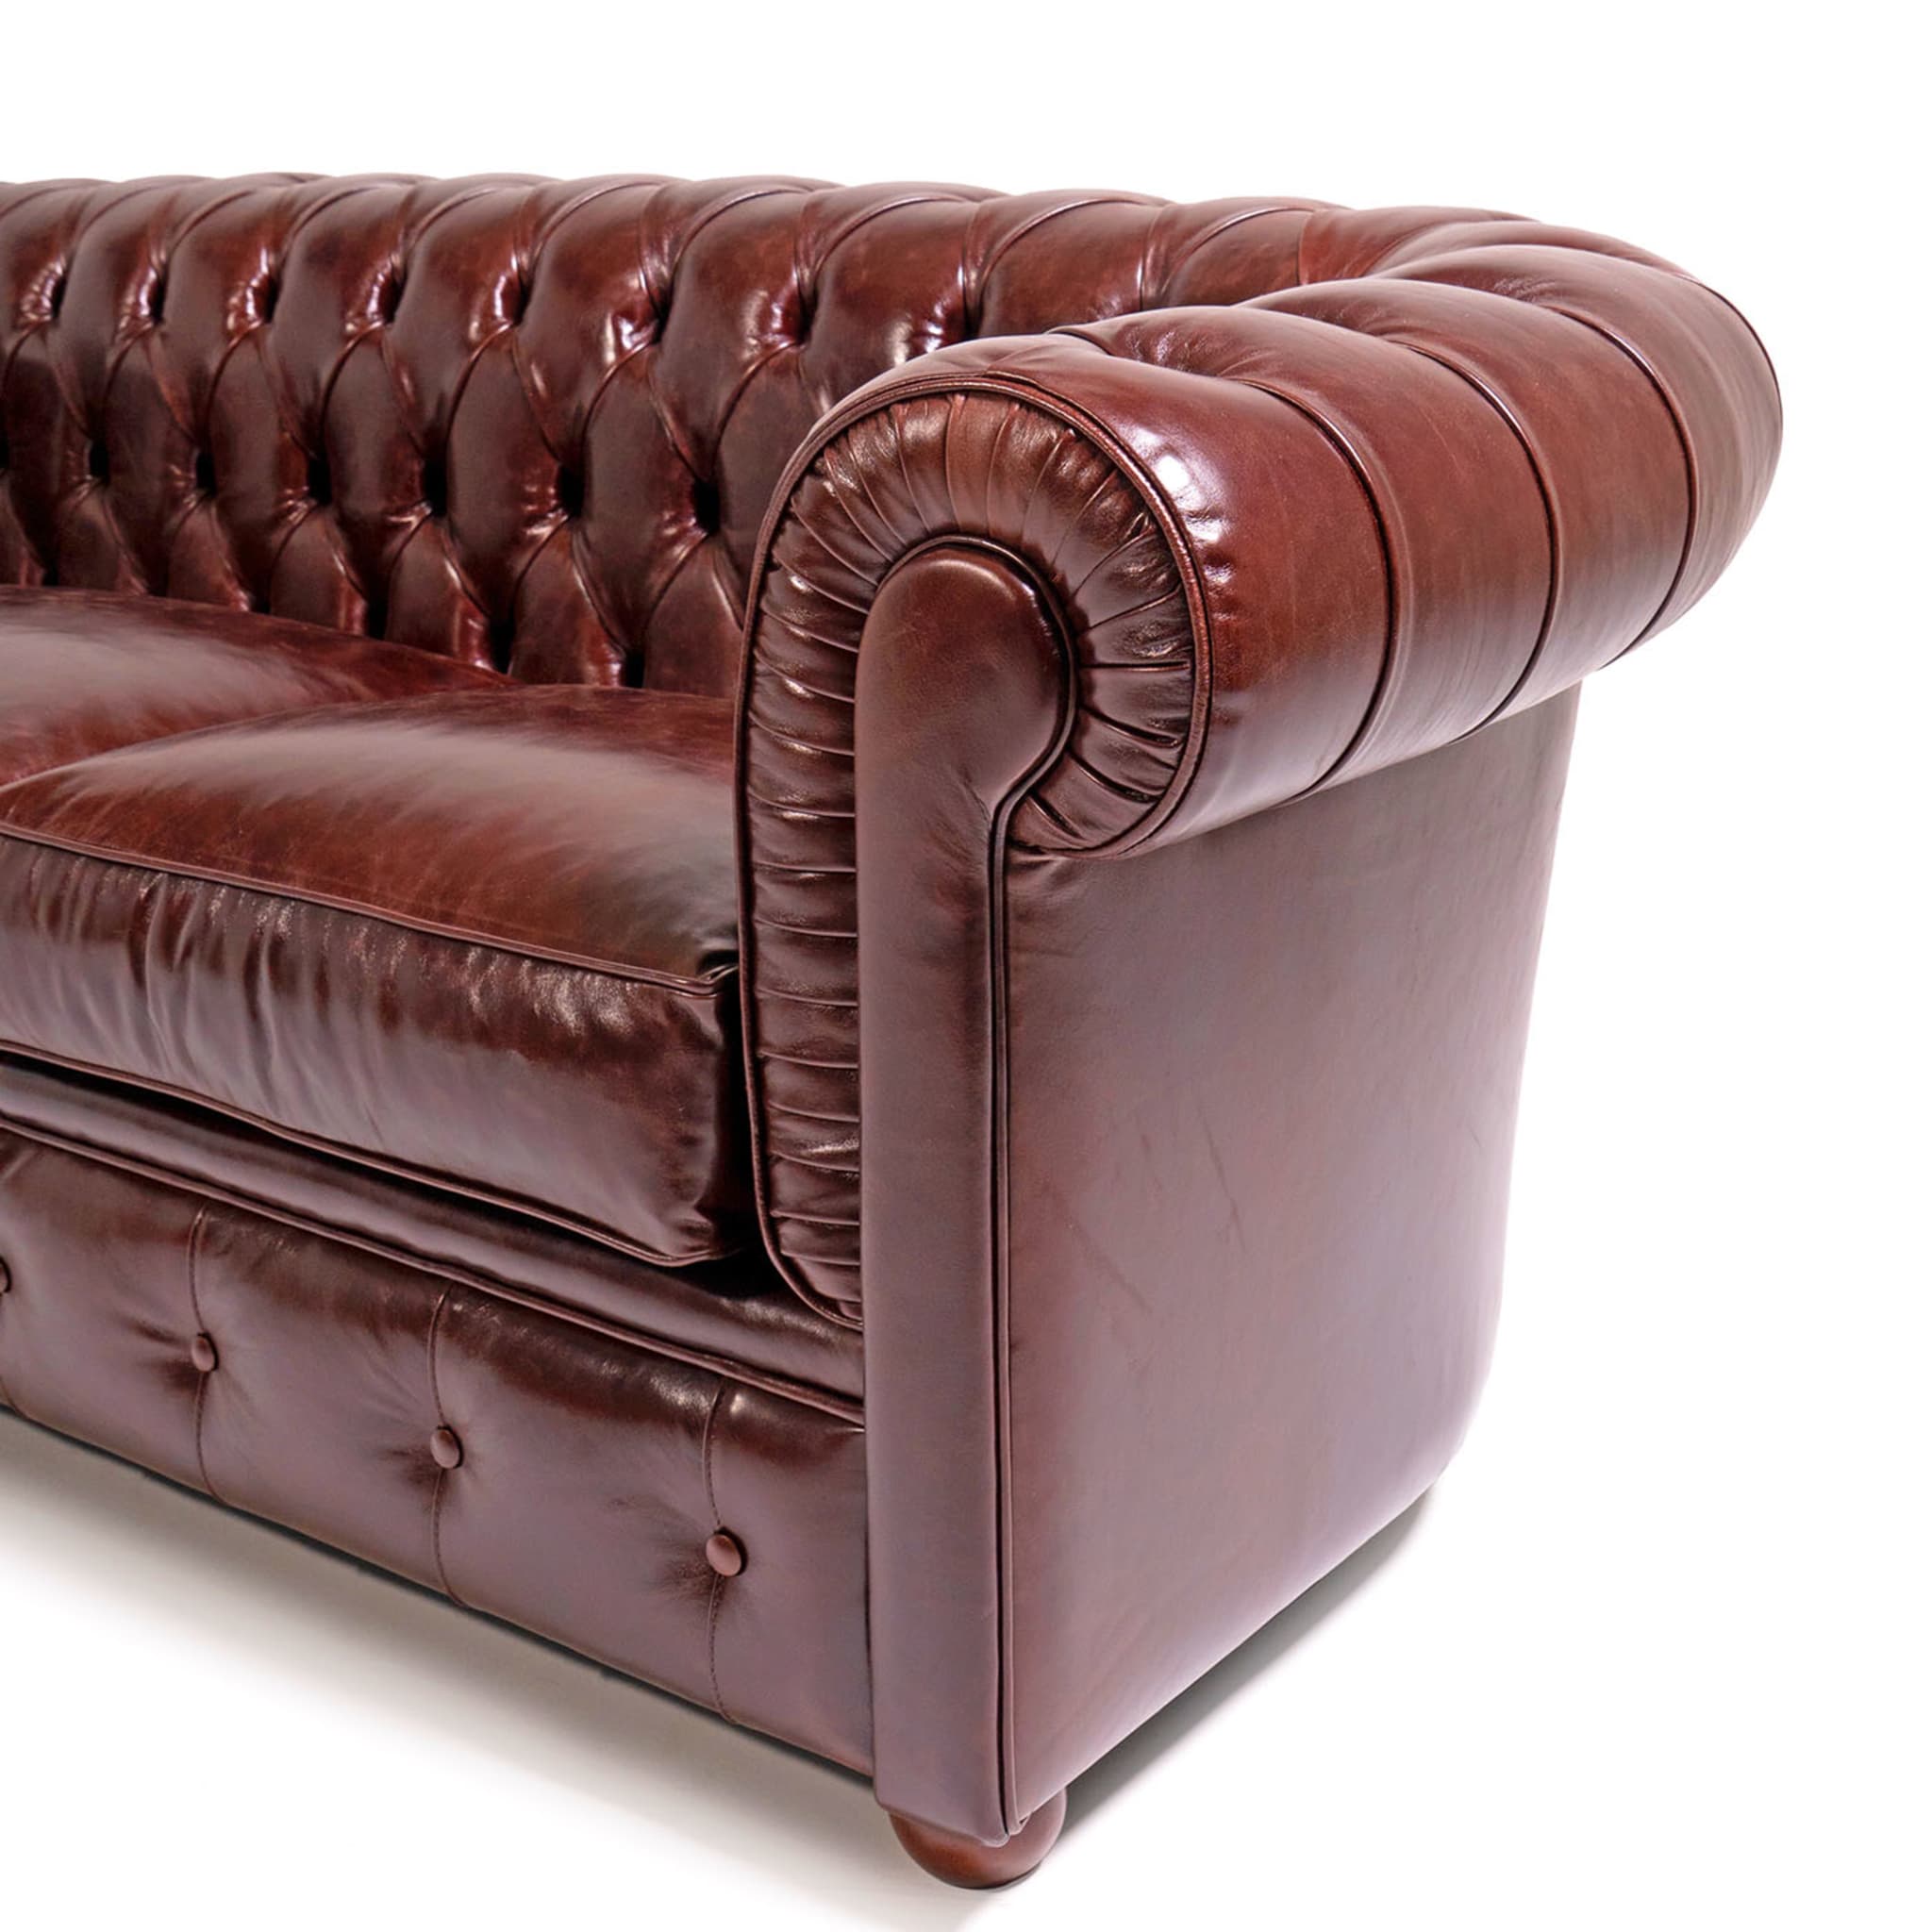 Chesterfield Ruby Leather 3-seater Sofa Tribeca Collection - Alternative view 1